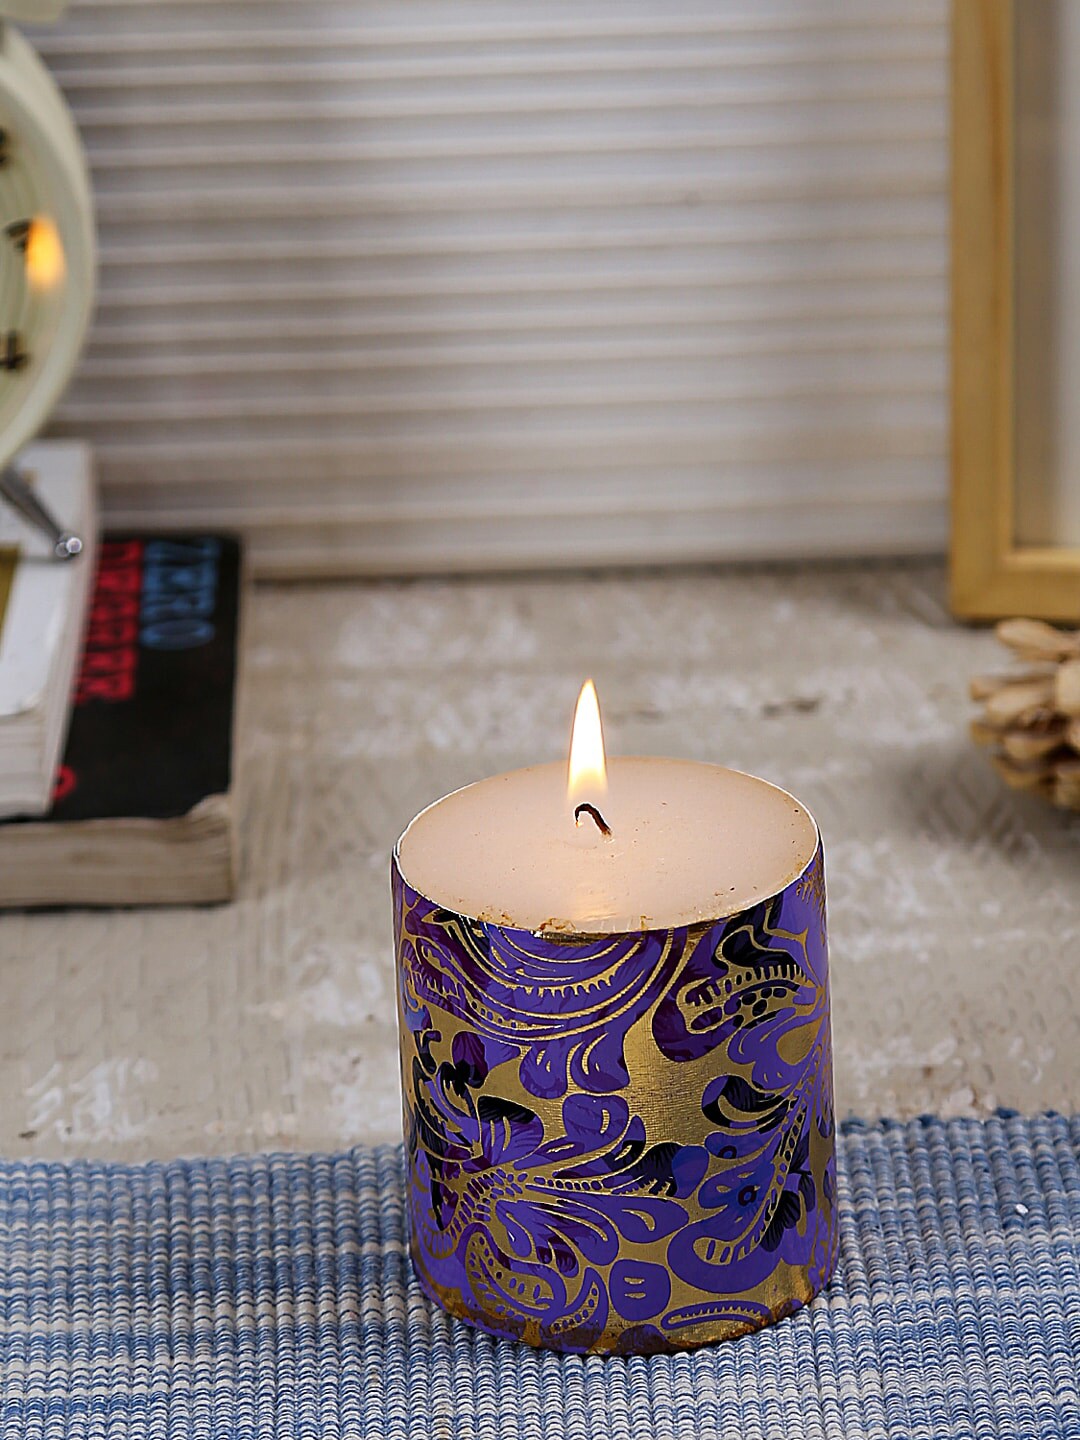 Aapno Rajasthan Purple Sweet and Permeating Festive design Pillar Candle Price in India